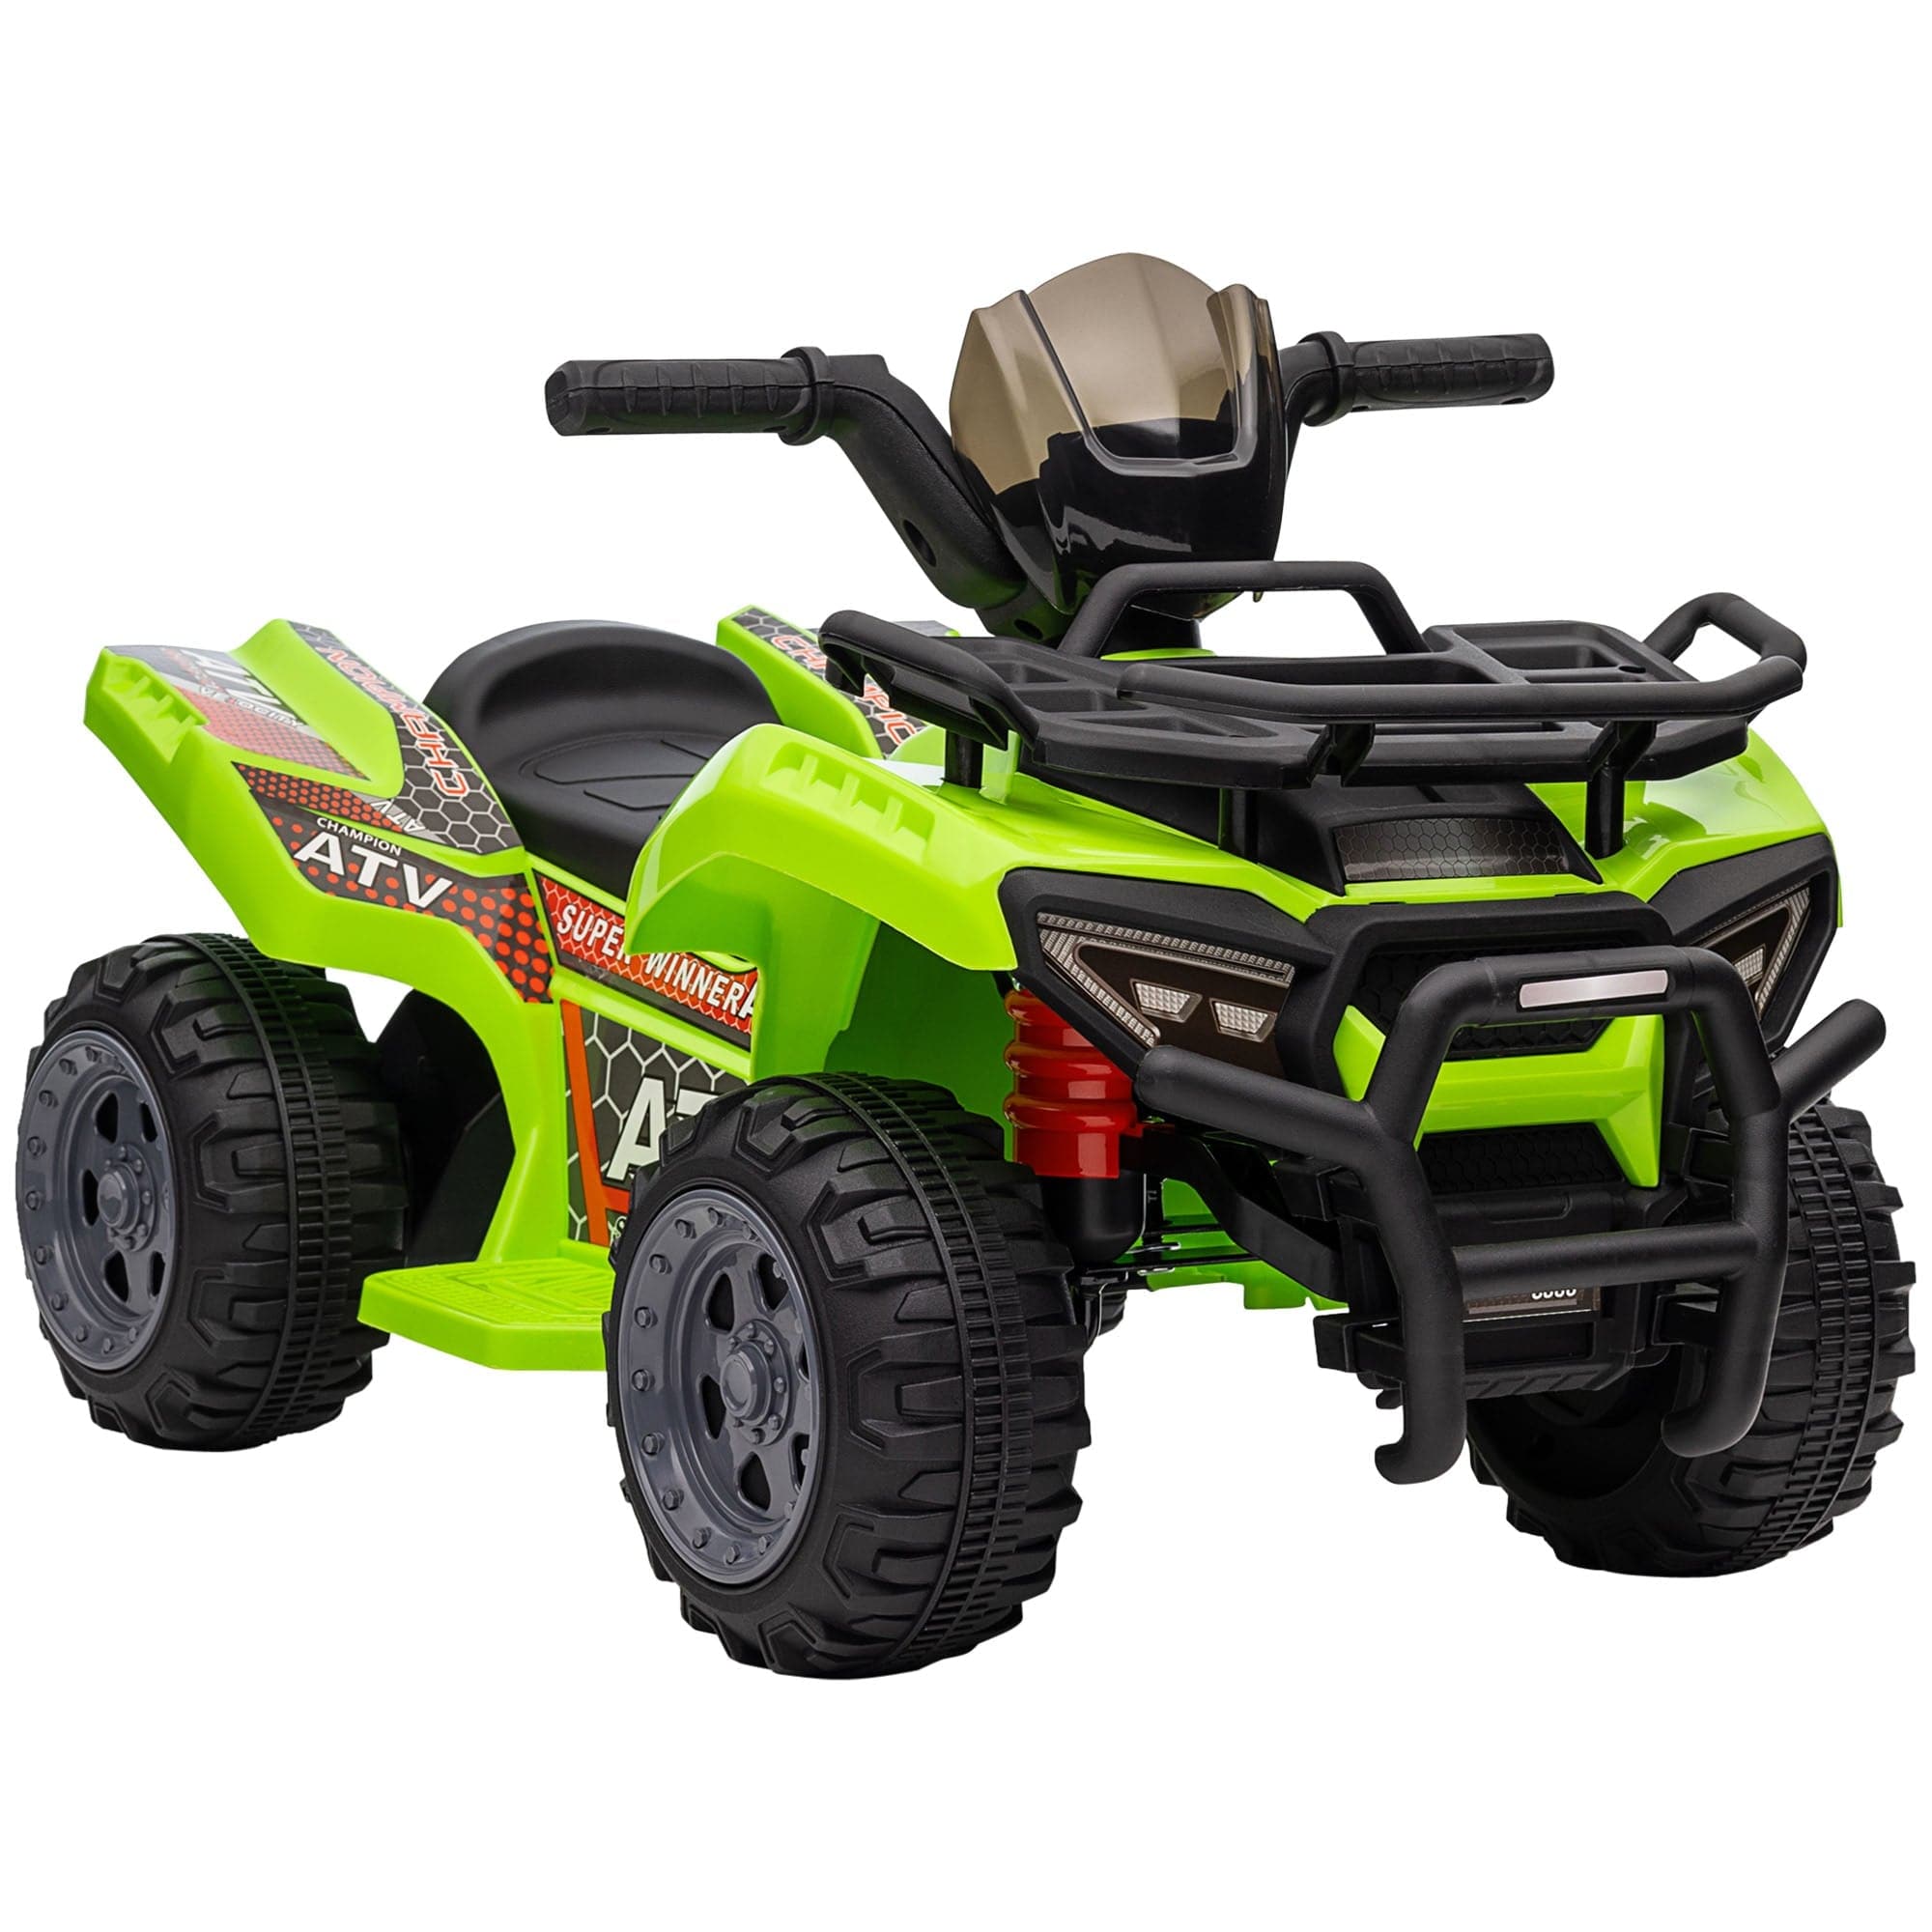 HOMCOM 6V Kids Electric Ride on Toy ATV Quad Bike with Music & Headlights for 18-36 Months (Green)